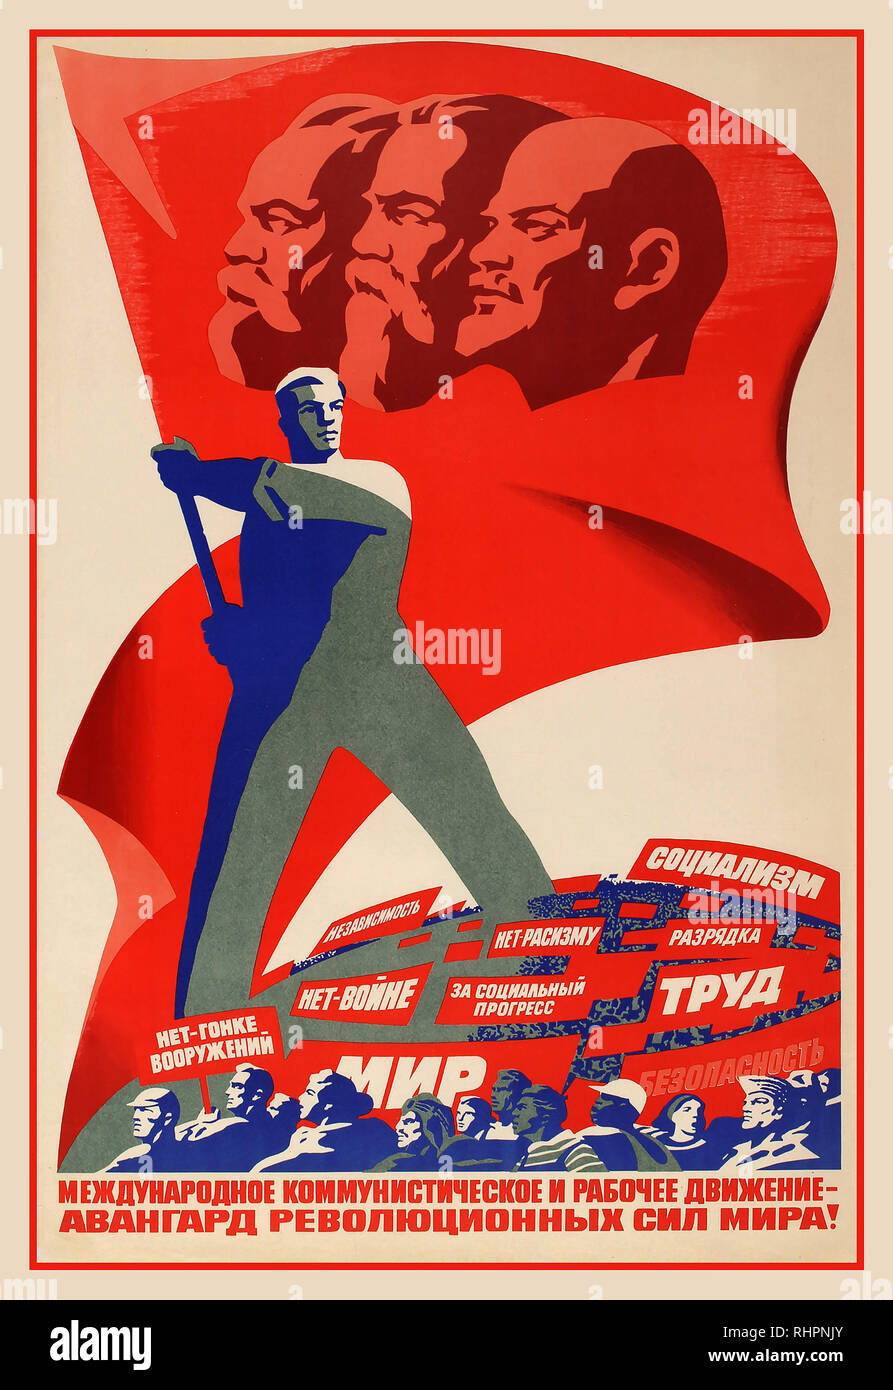 Vintage Soviet Propaganda Poster: International Communist and Worker Movement, at the front of the World Proletariat. Poster illustrates a worker waving a giant red flag celebrating Lenin, Engels and Marx. Russia 1982  Artist: V. Briskin Stock Photo